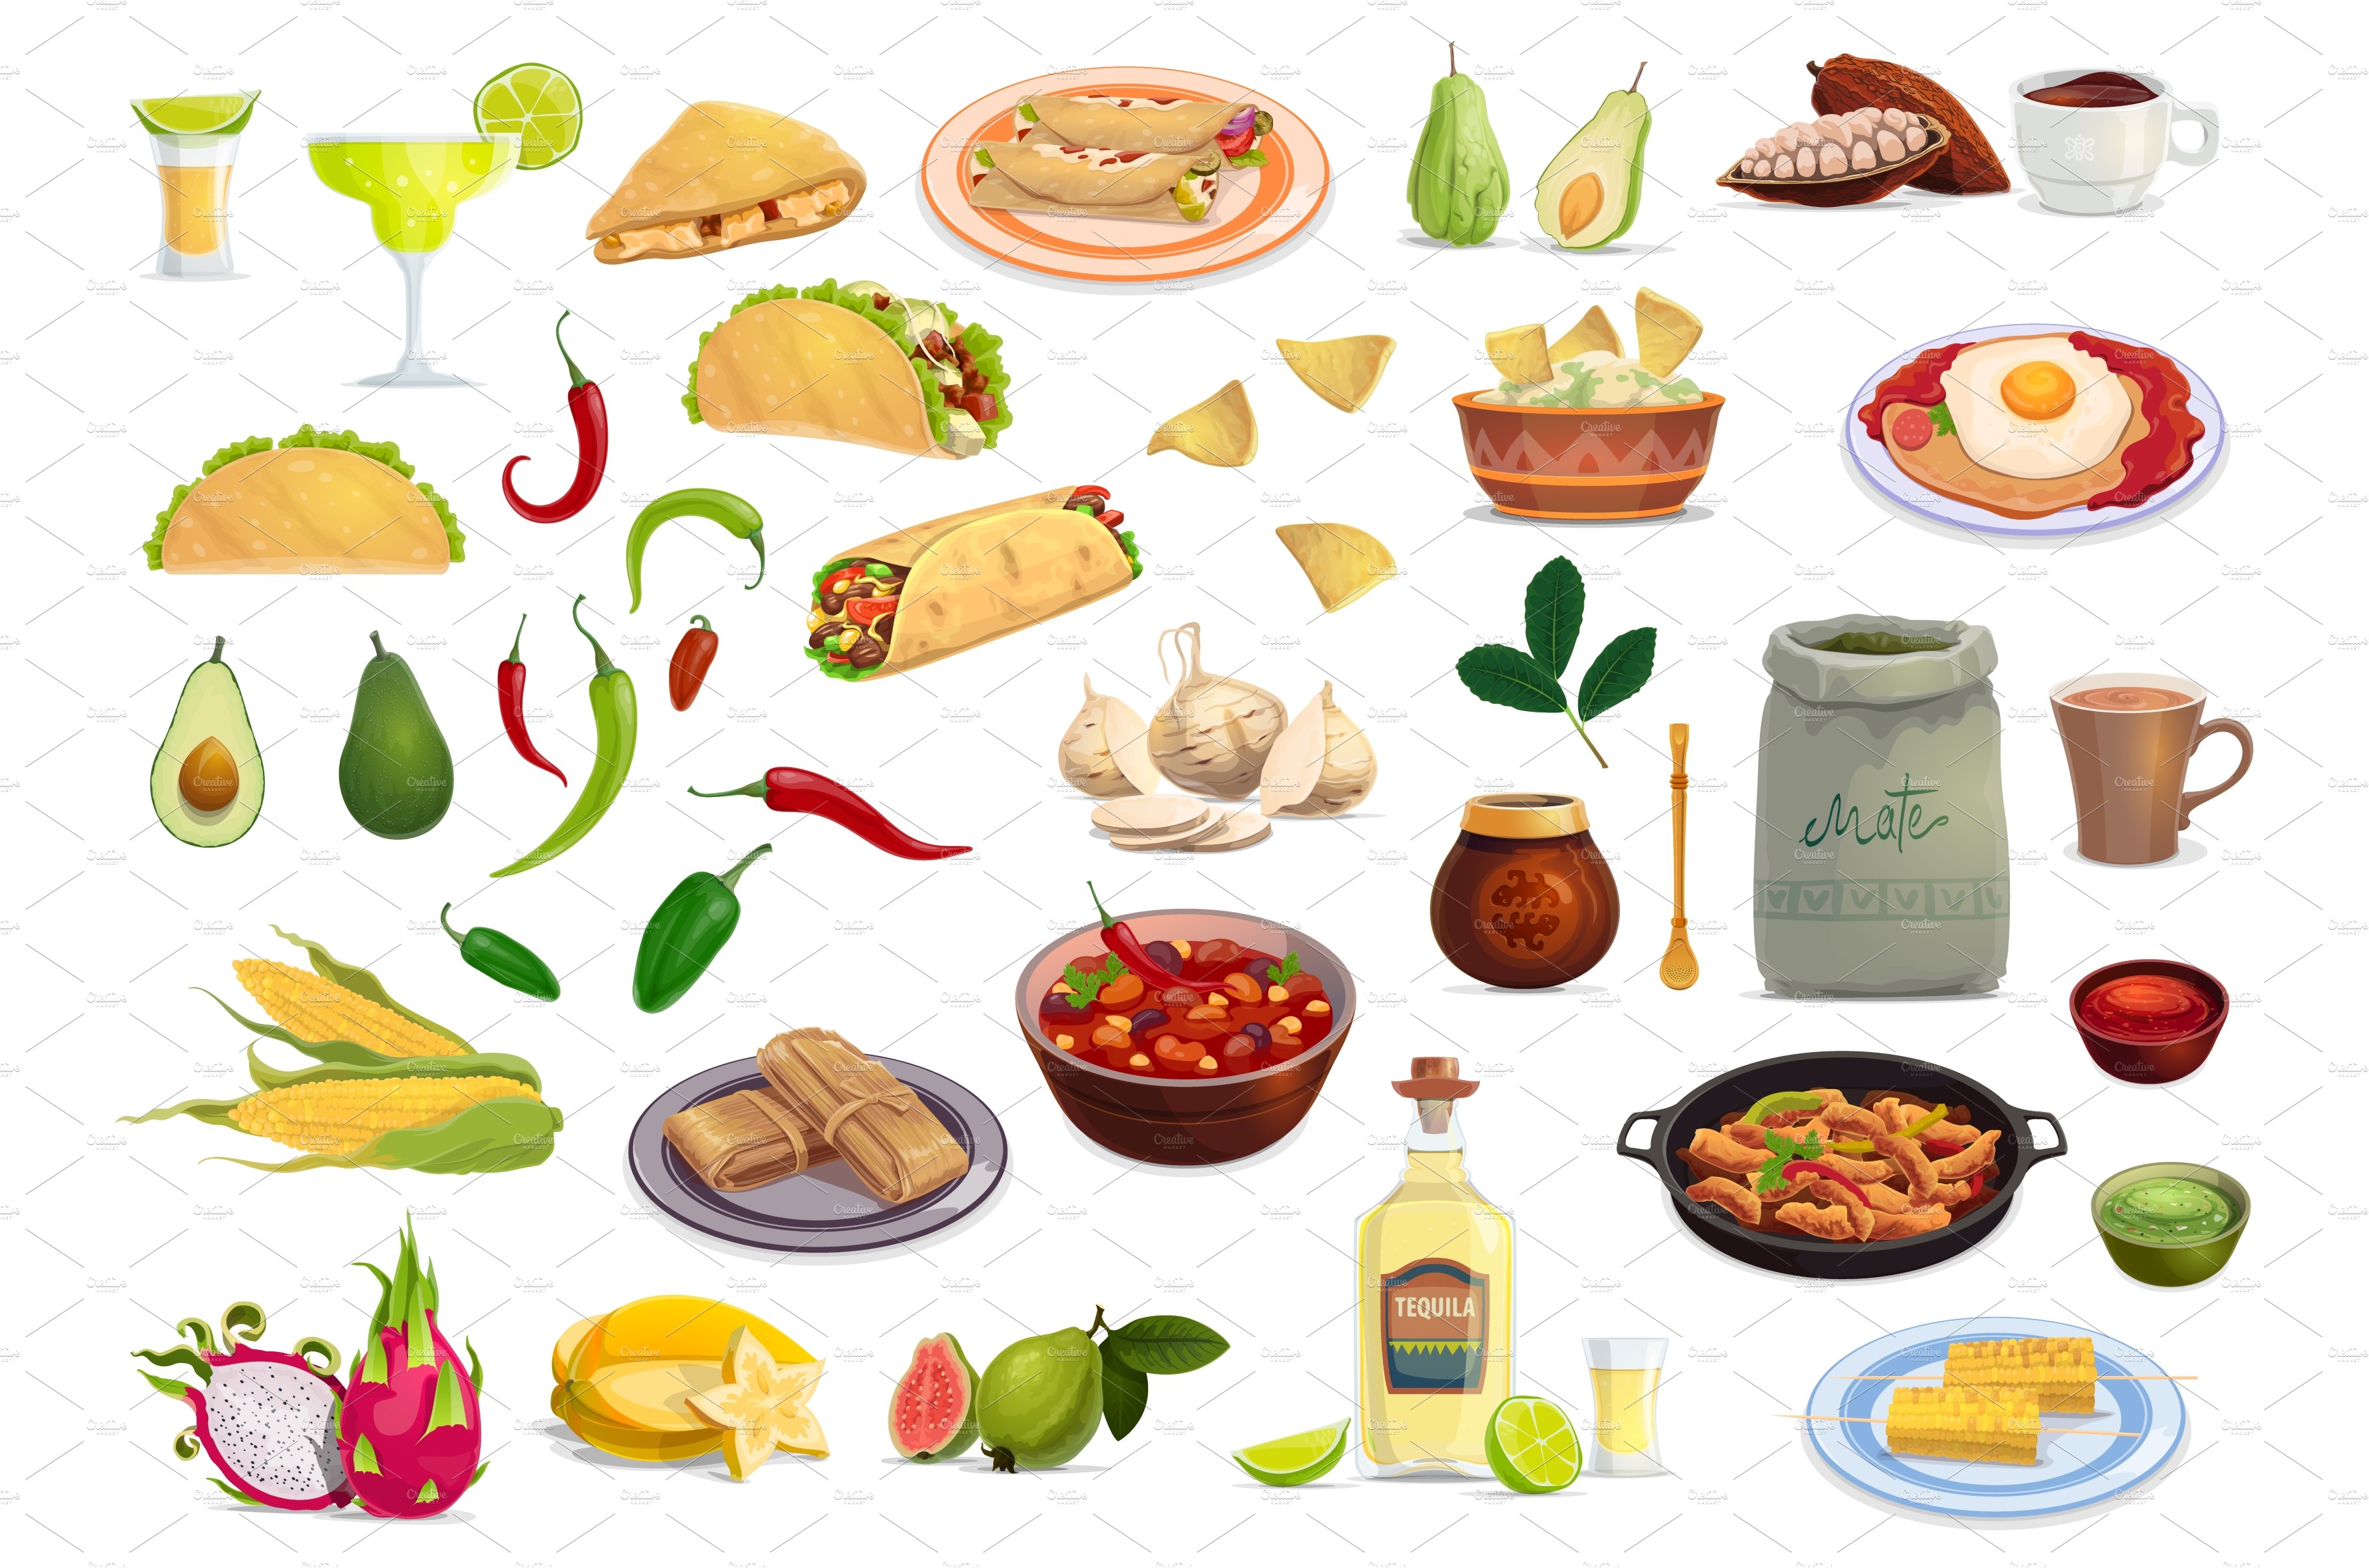 Mexican cuisine food and drinks cover image.